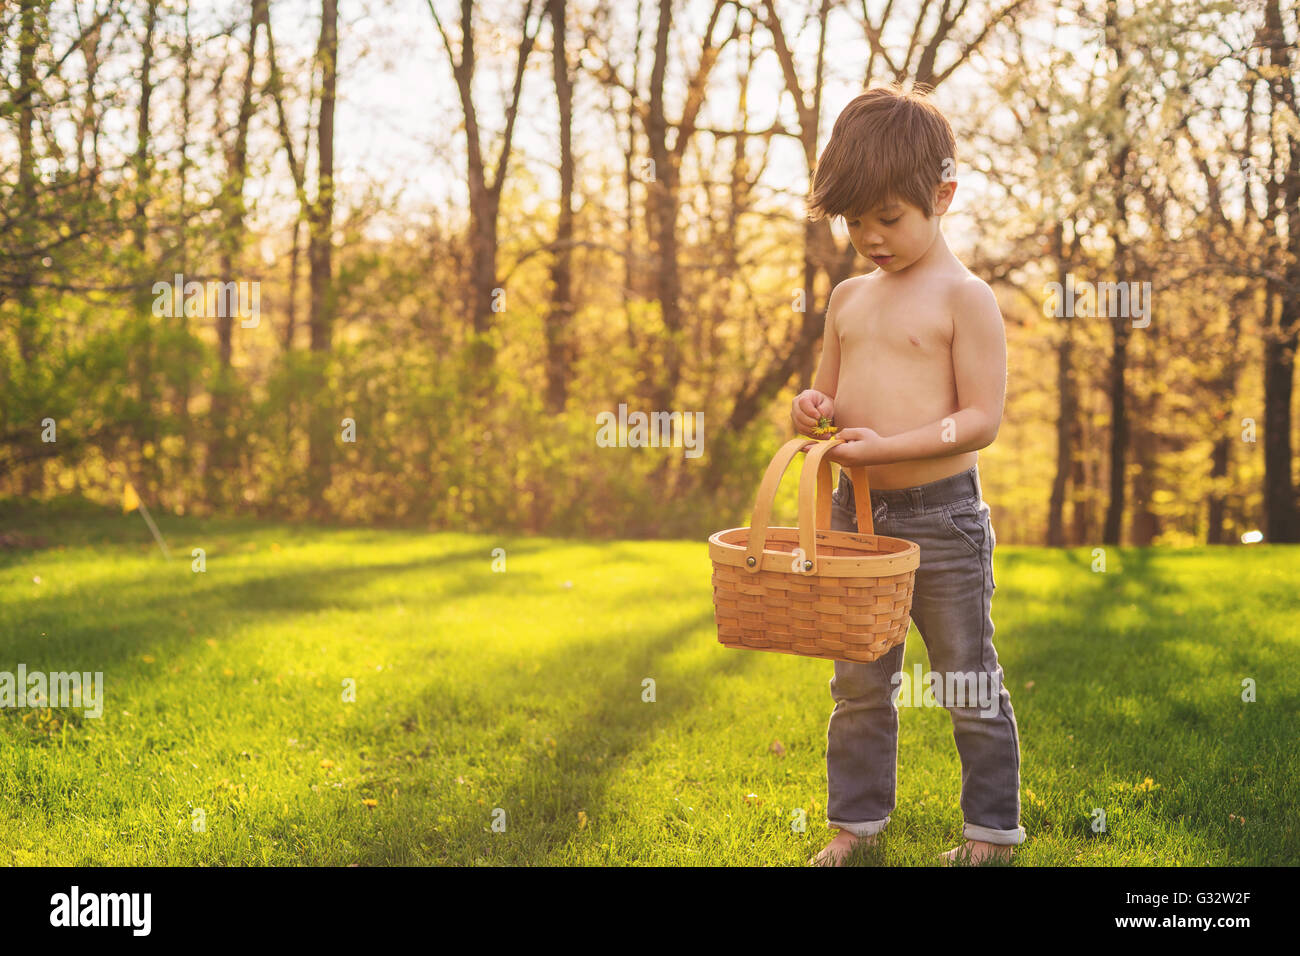 Boy holding basket collecting flowers Stock Photo - Alamy